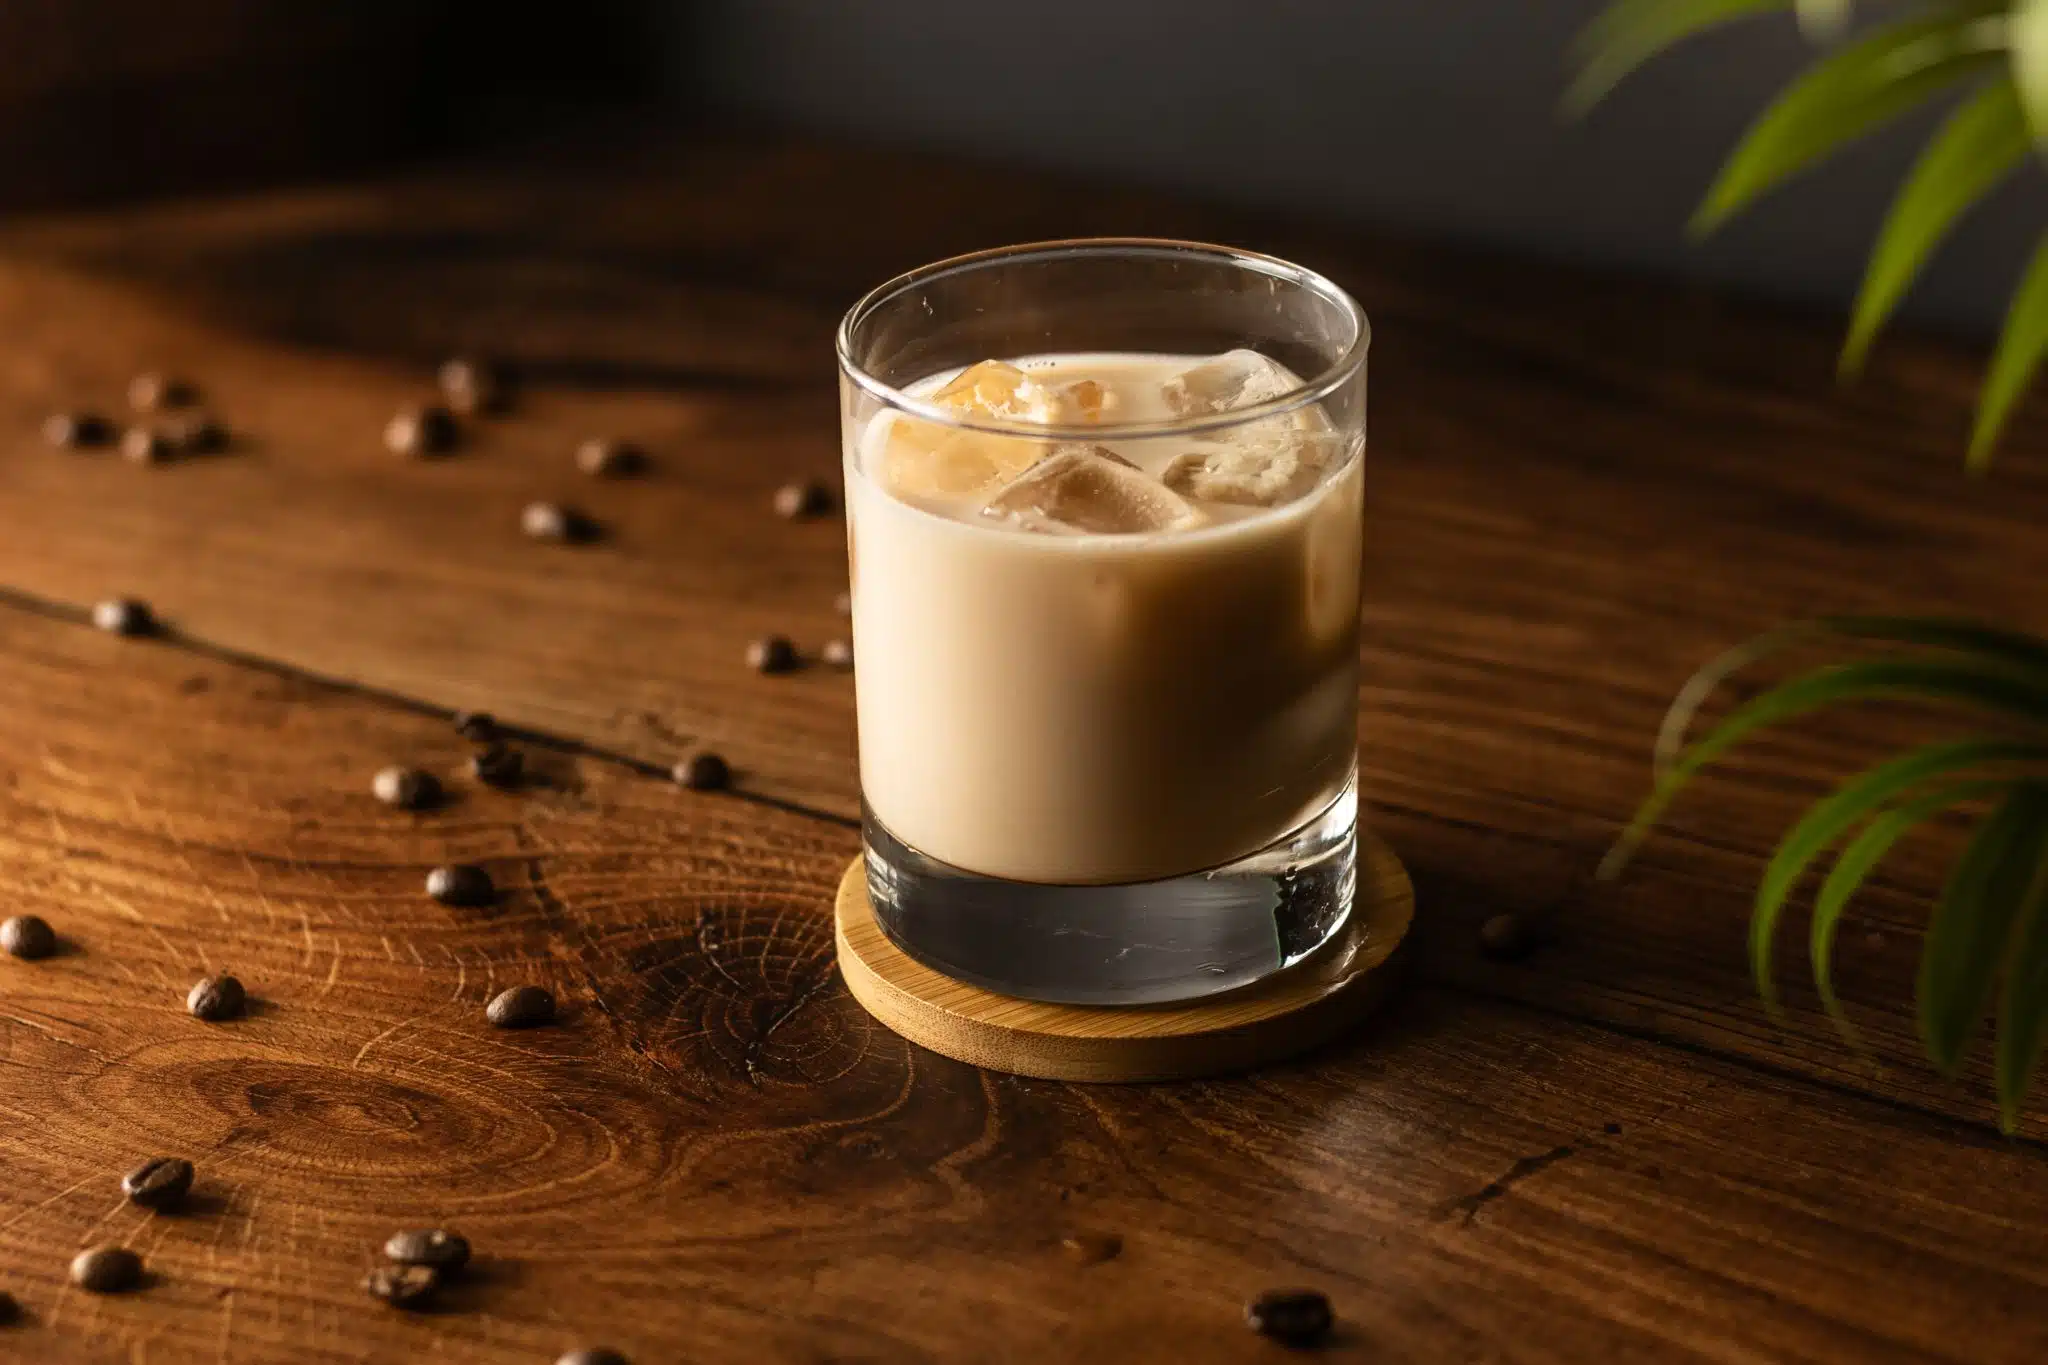 A side shot of a White Russian cocktail in an Old Fashioned glass on a wooden background.